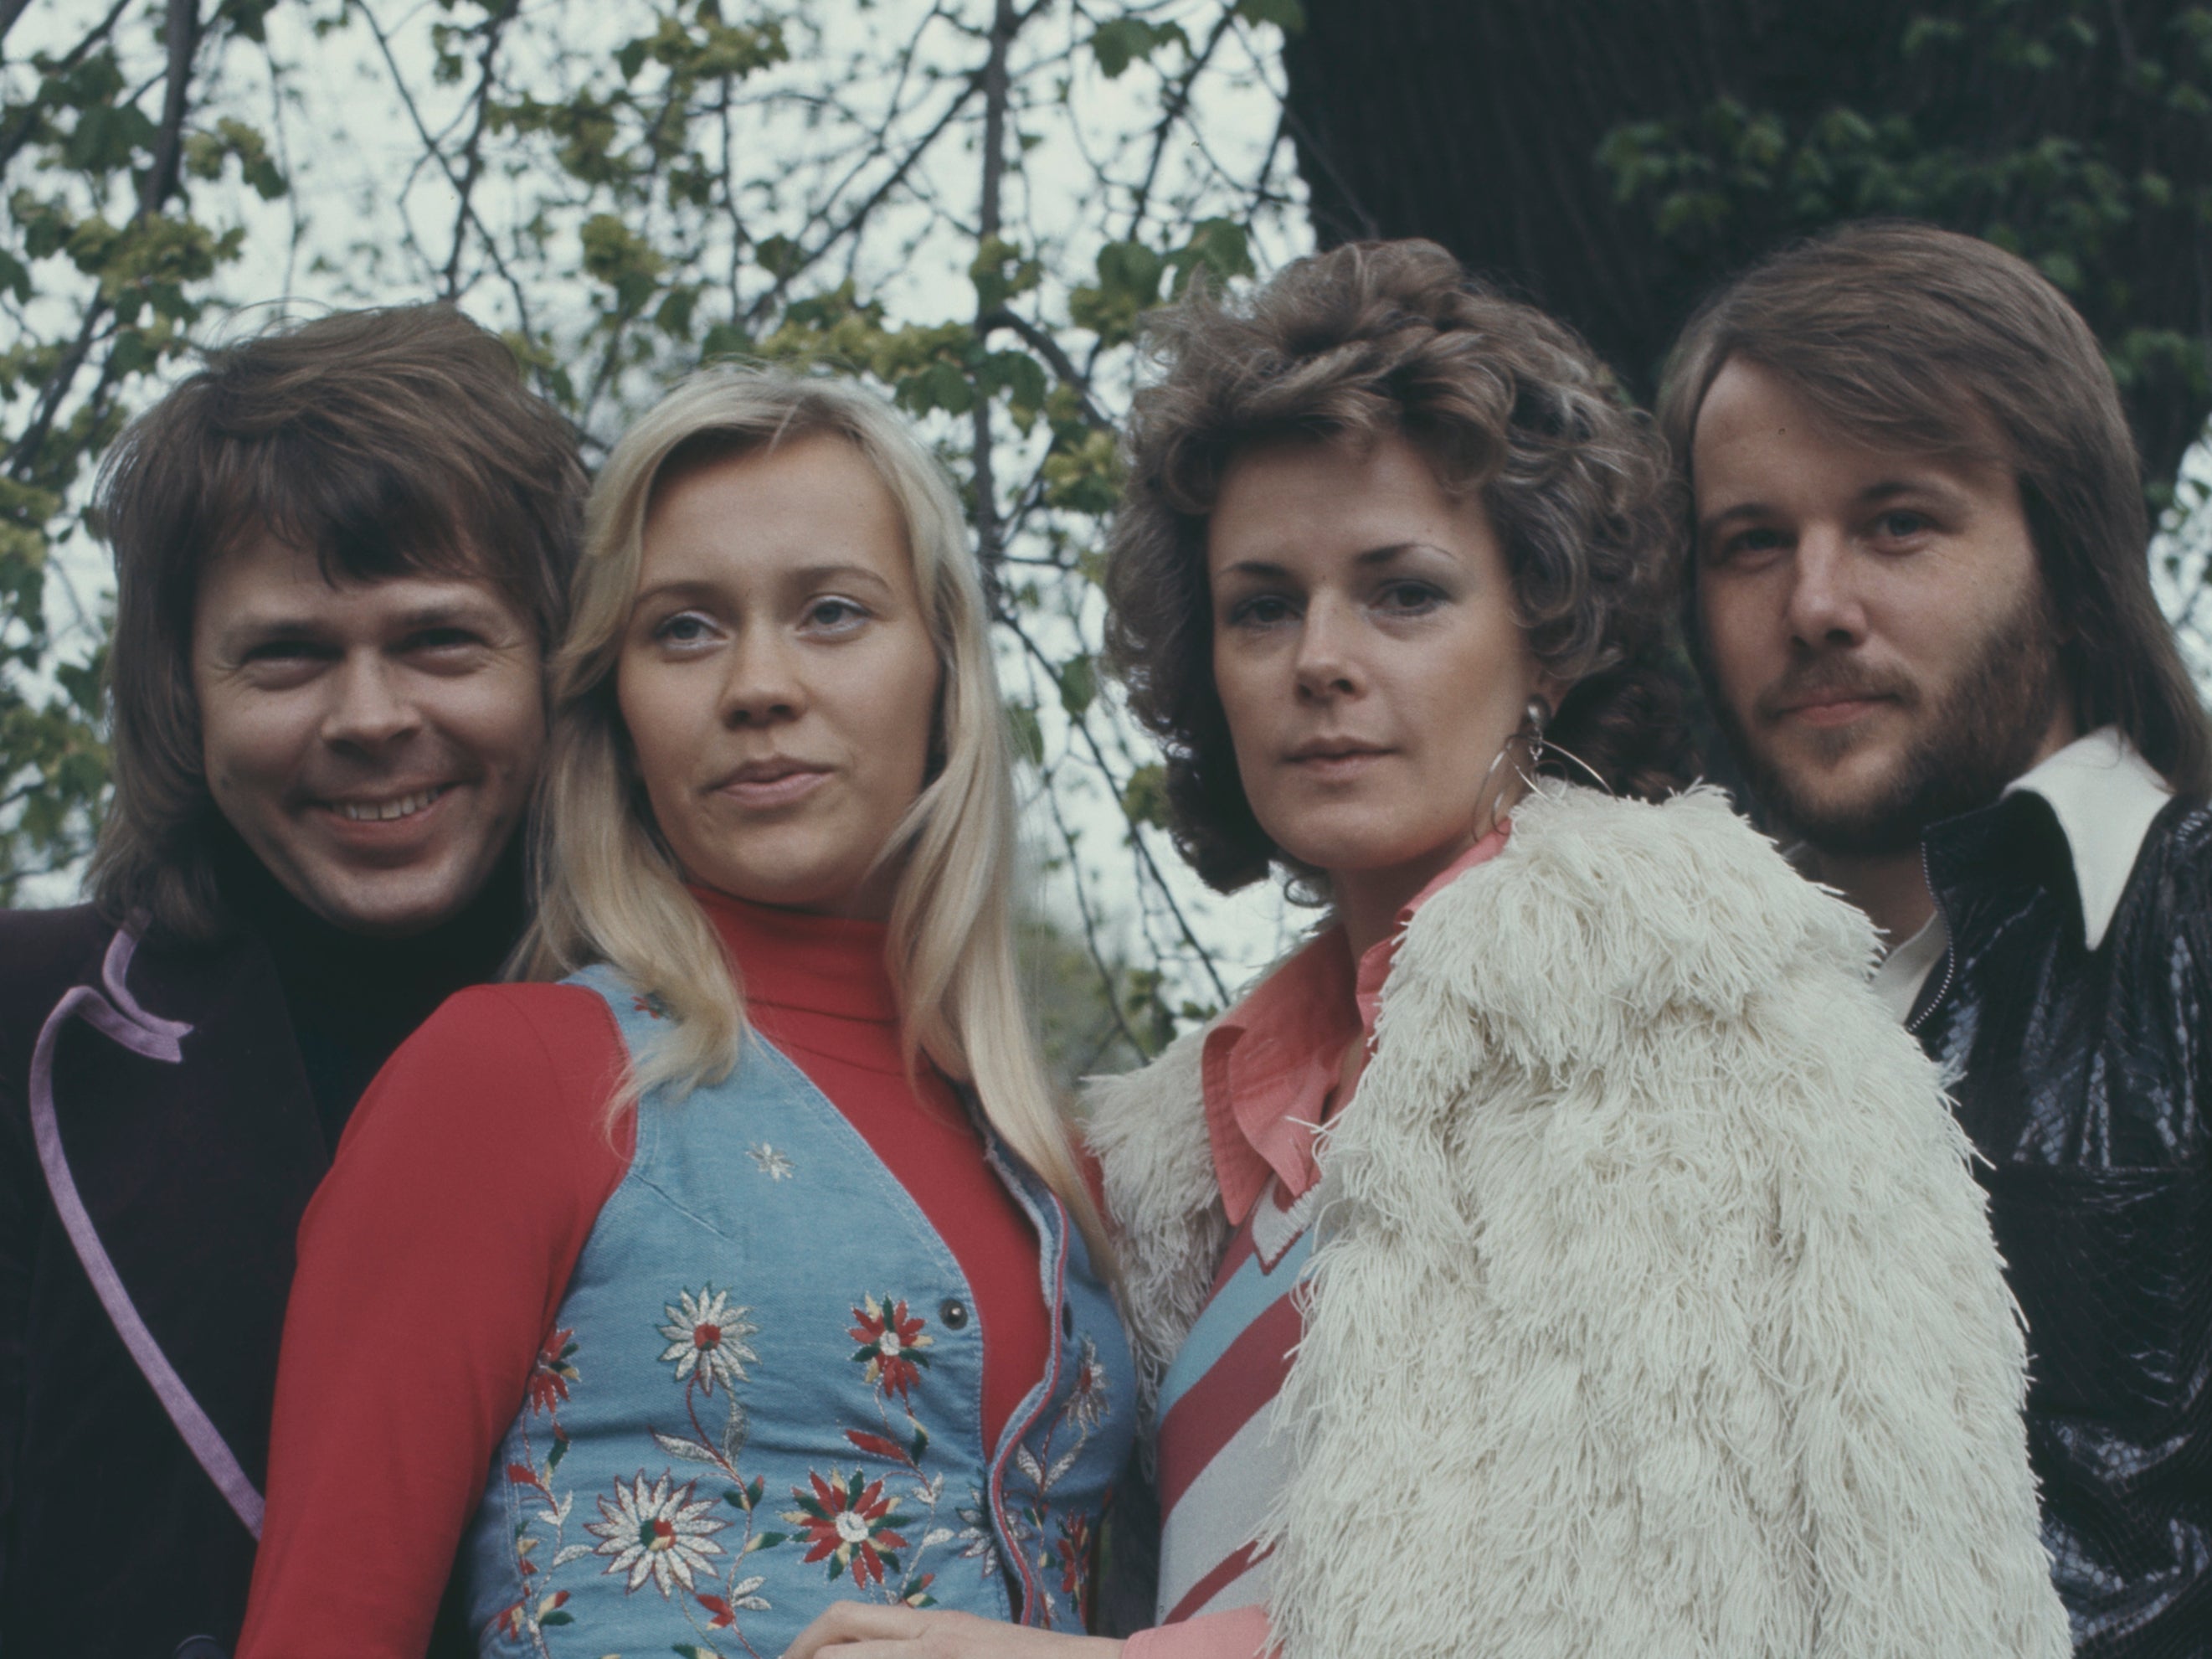 Abba photographed in 1974